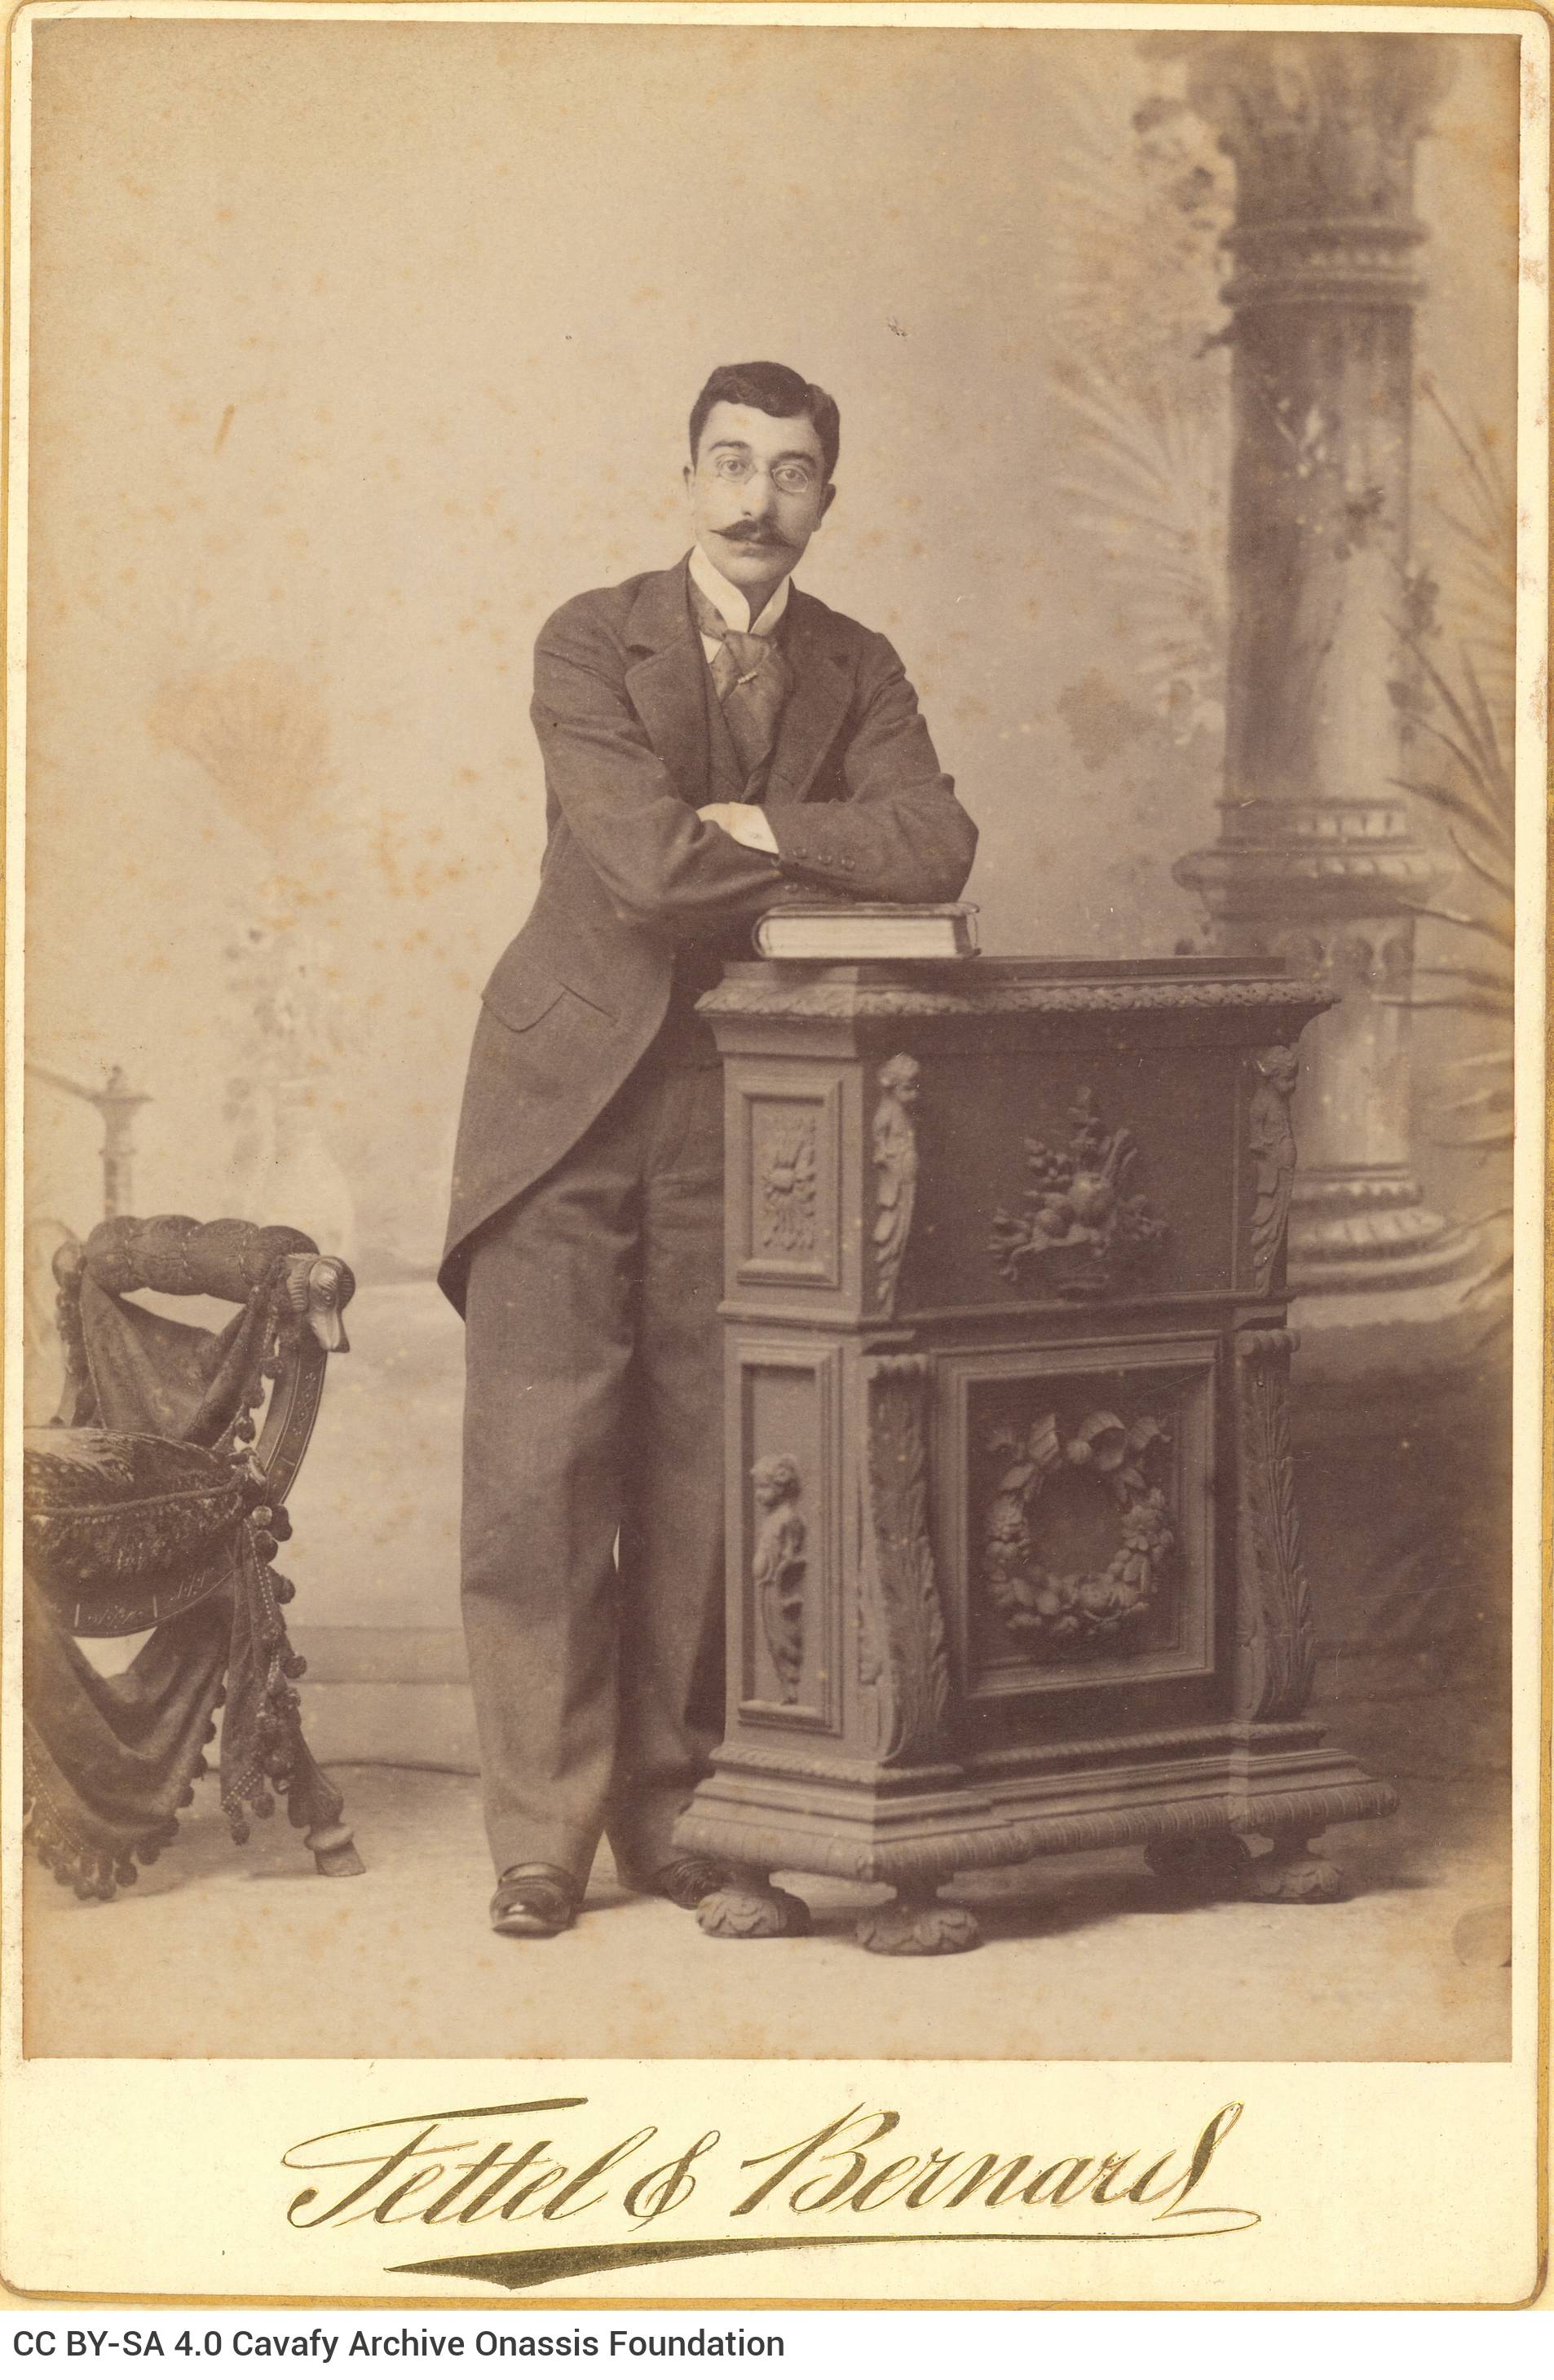 Undated photographic portrait of Cavafy by the photo shop of Fettel & Bernard in Alexandria, in three copies. The poet has a 